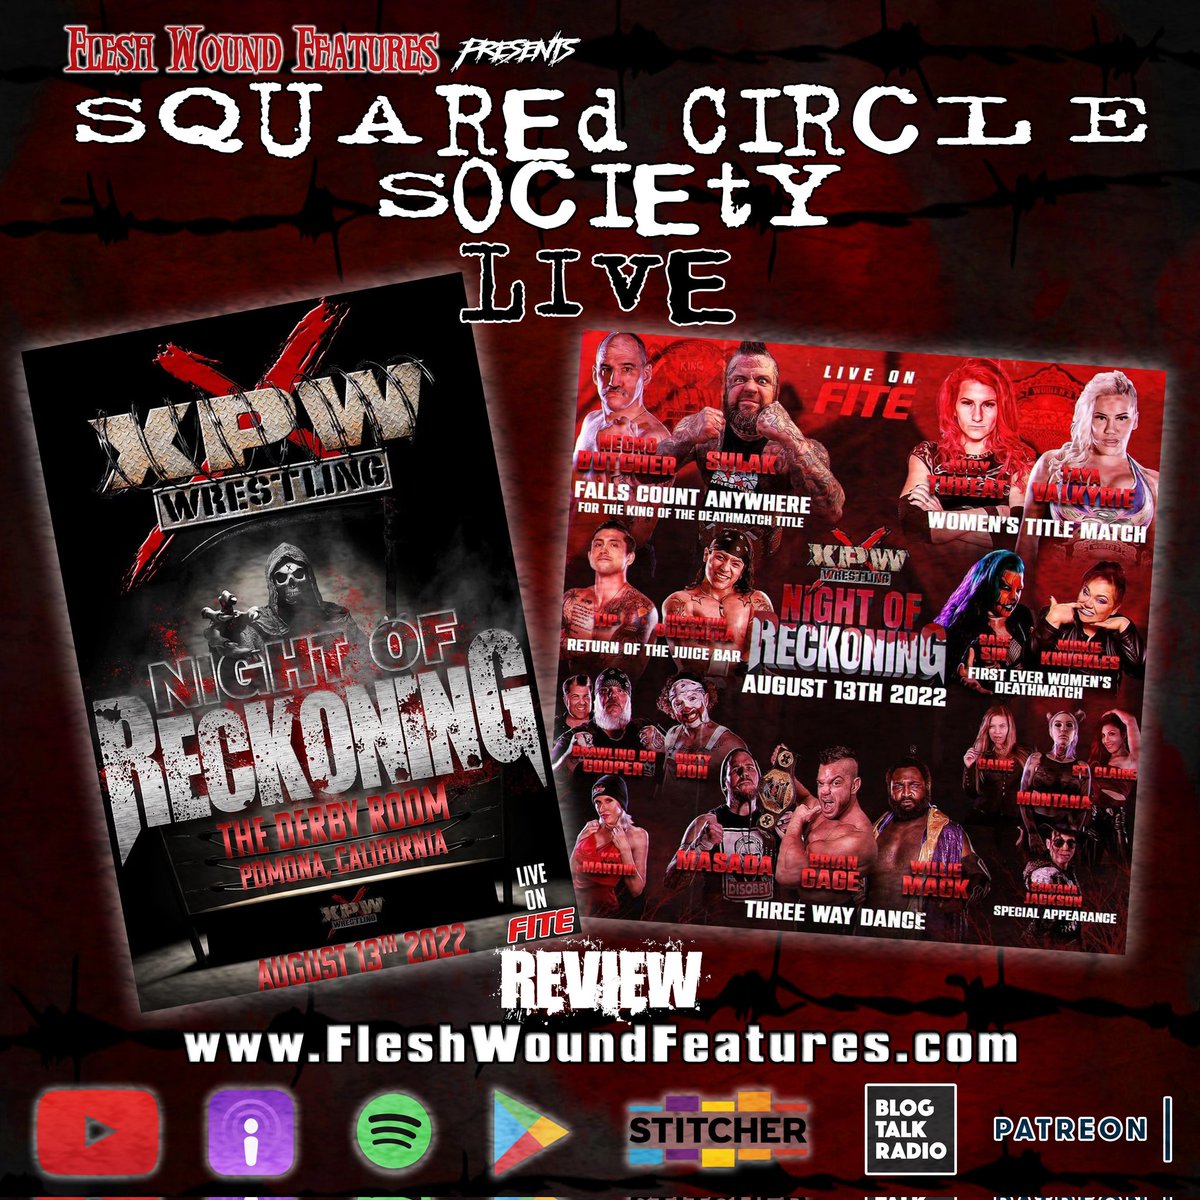 We break down all the crimson soaked action that only @Thexpwwrestling can deliver. Join us live and join in the conversation! youtu.be/1mSnQTjdzFQ #XPW #XPWNightOfReckoning #shlak #deathmatch #xpwwrestling #tayavalkyrie #robblack #extremewrestling #masada #mickieknuckles